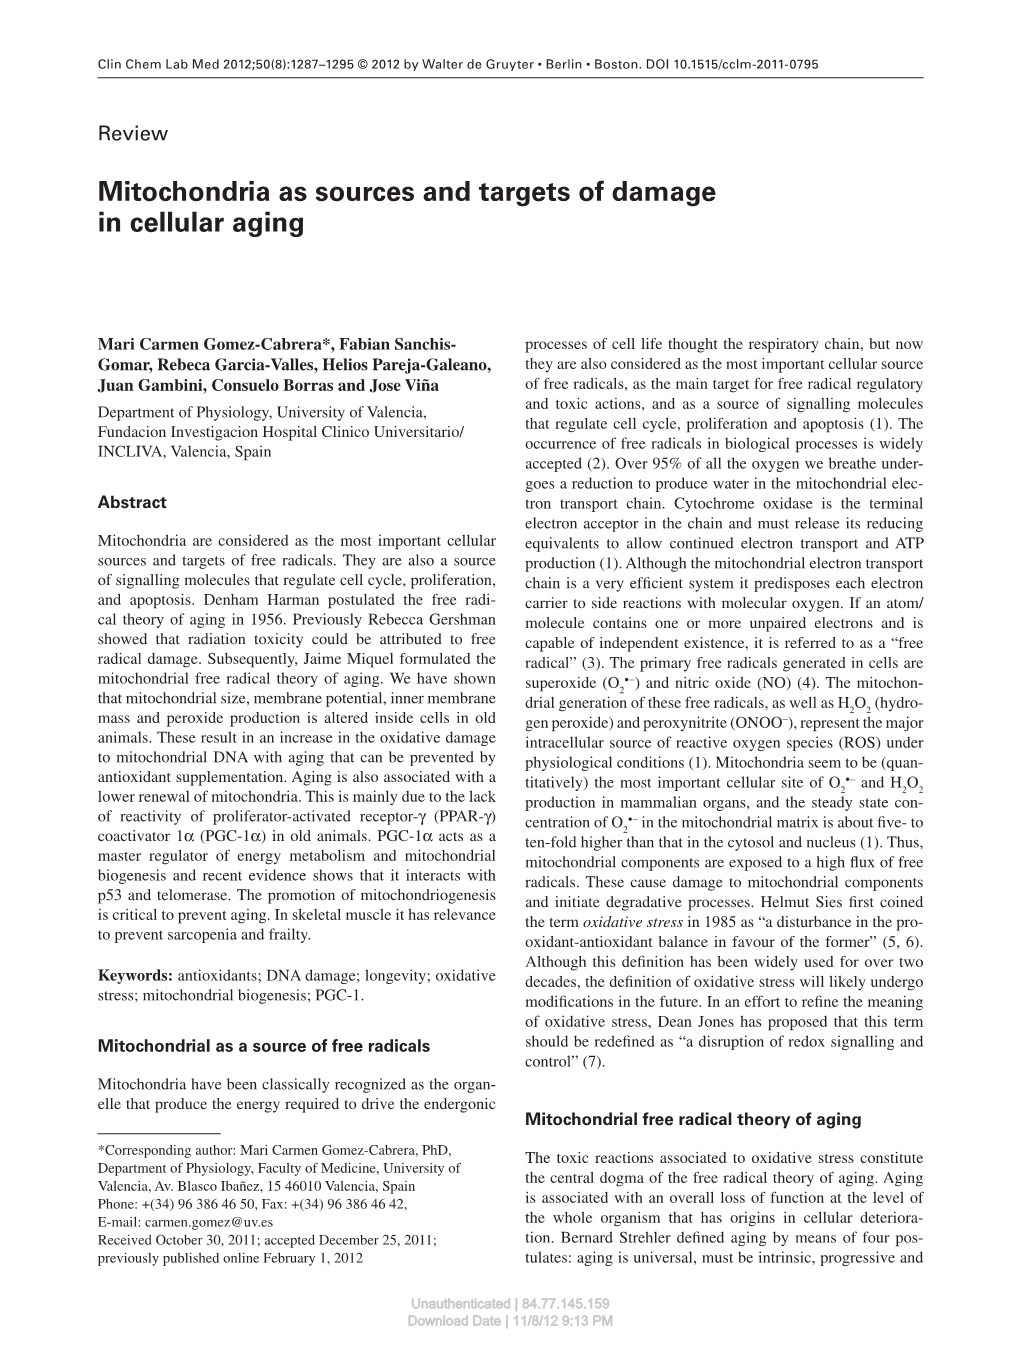 Mitochondria As Sources and Targets of Damage in Cellular Aging